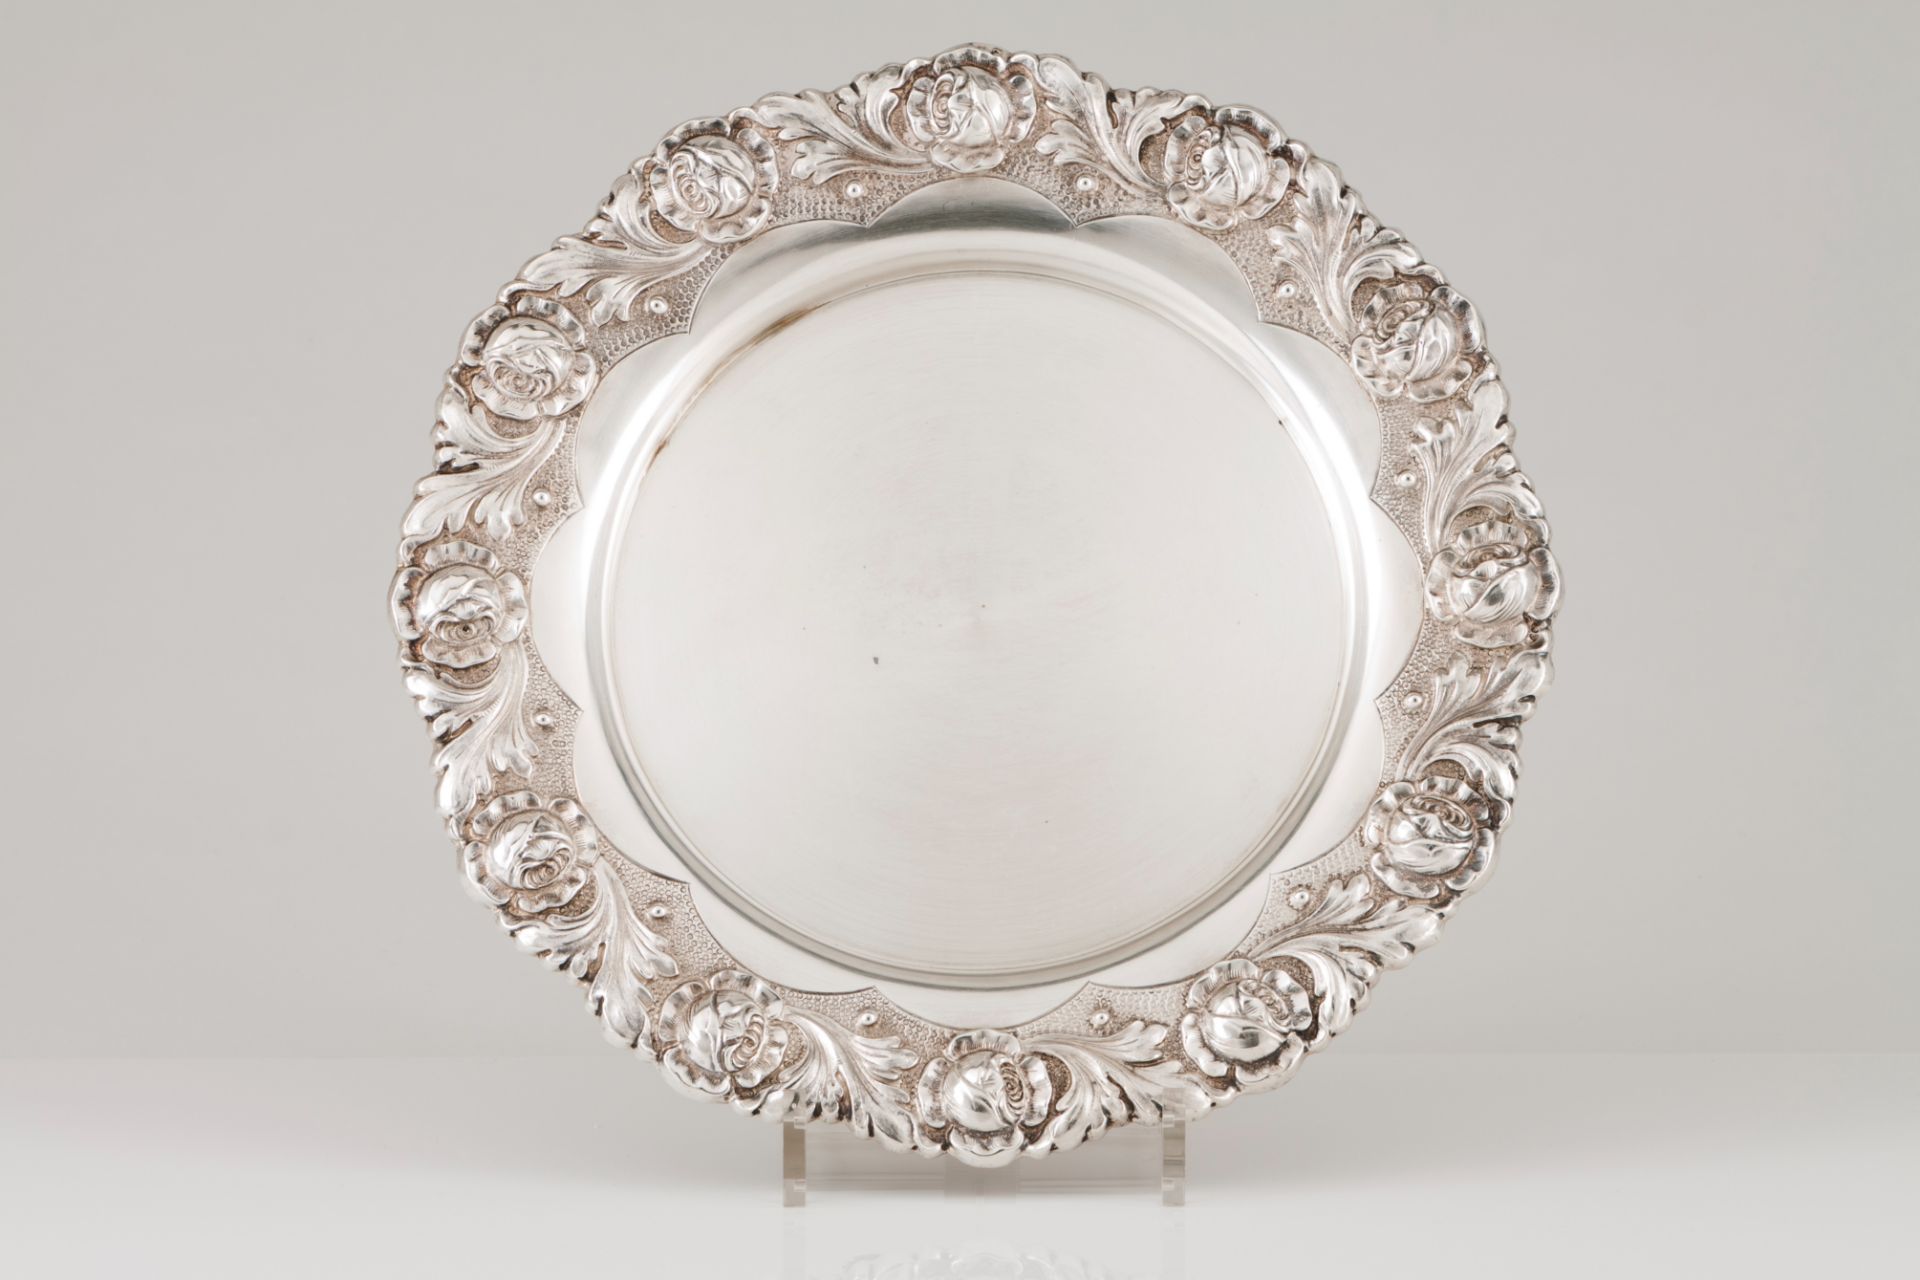 A salverPortuguese silver Plain centre and engraved lip of raised roses and foliage decoration On